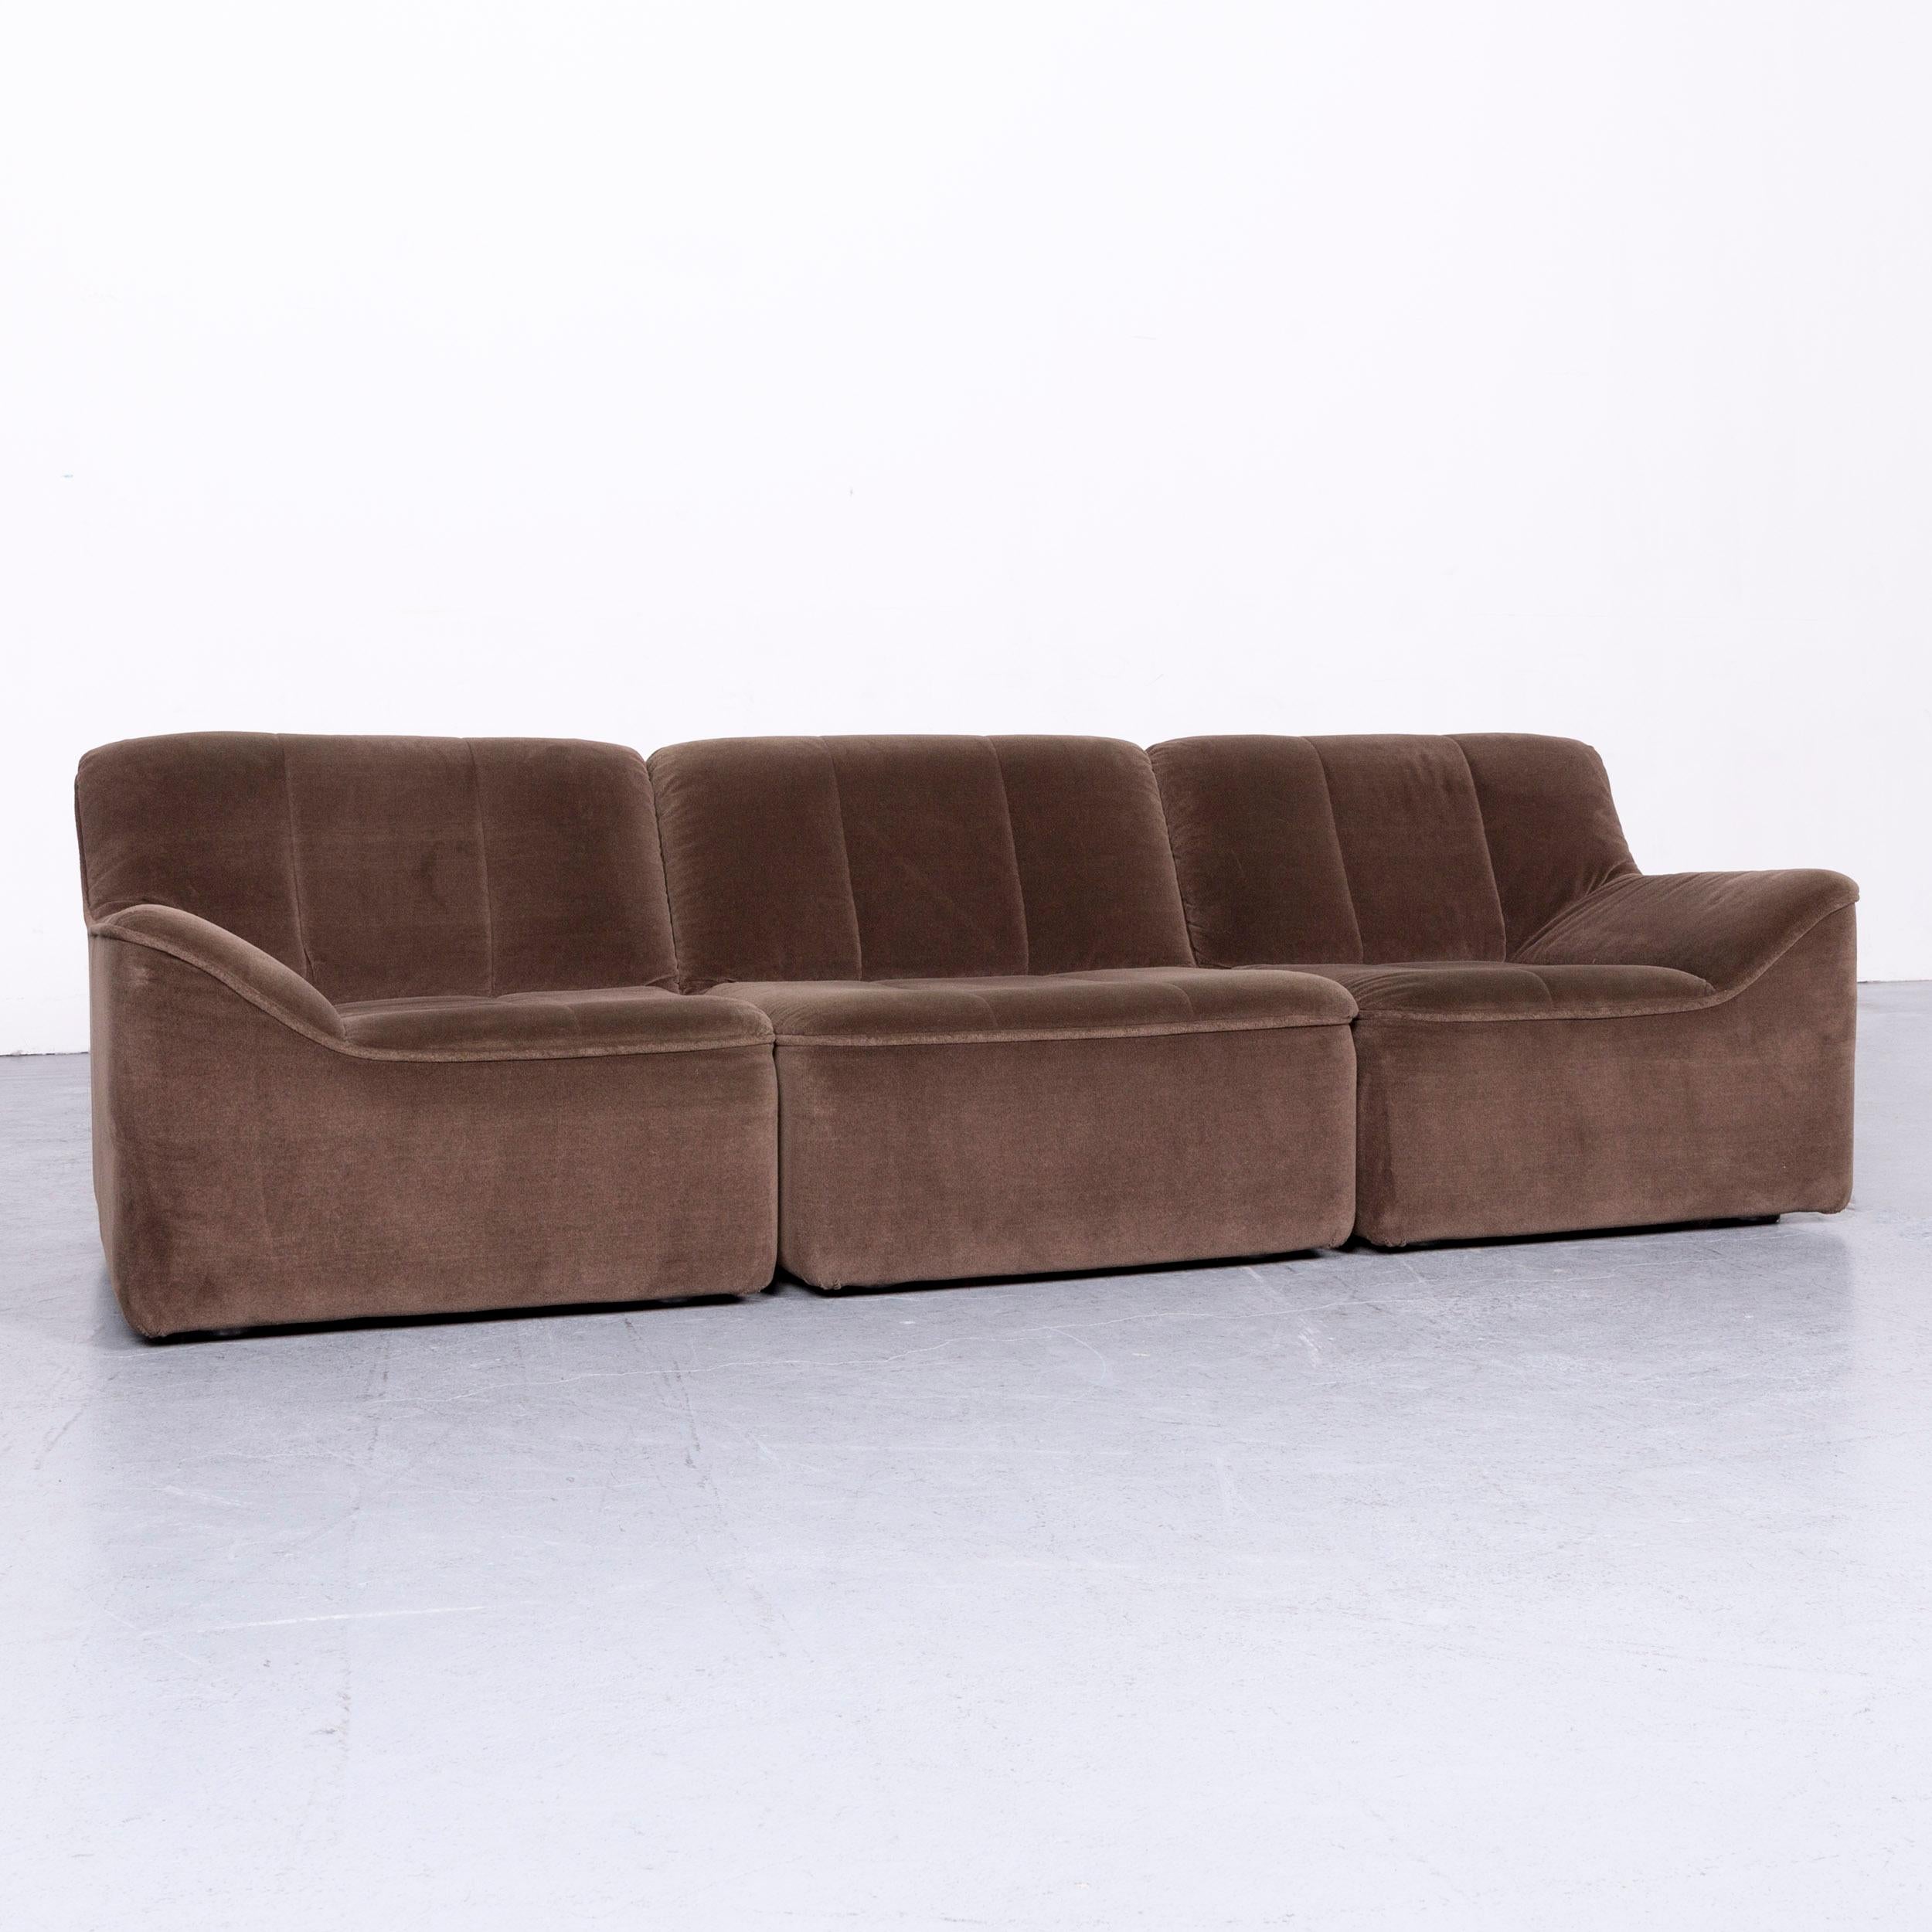 We bring to you a COR designer fabric sofa brown three-seat couch.

















